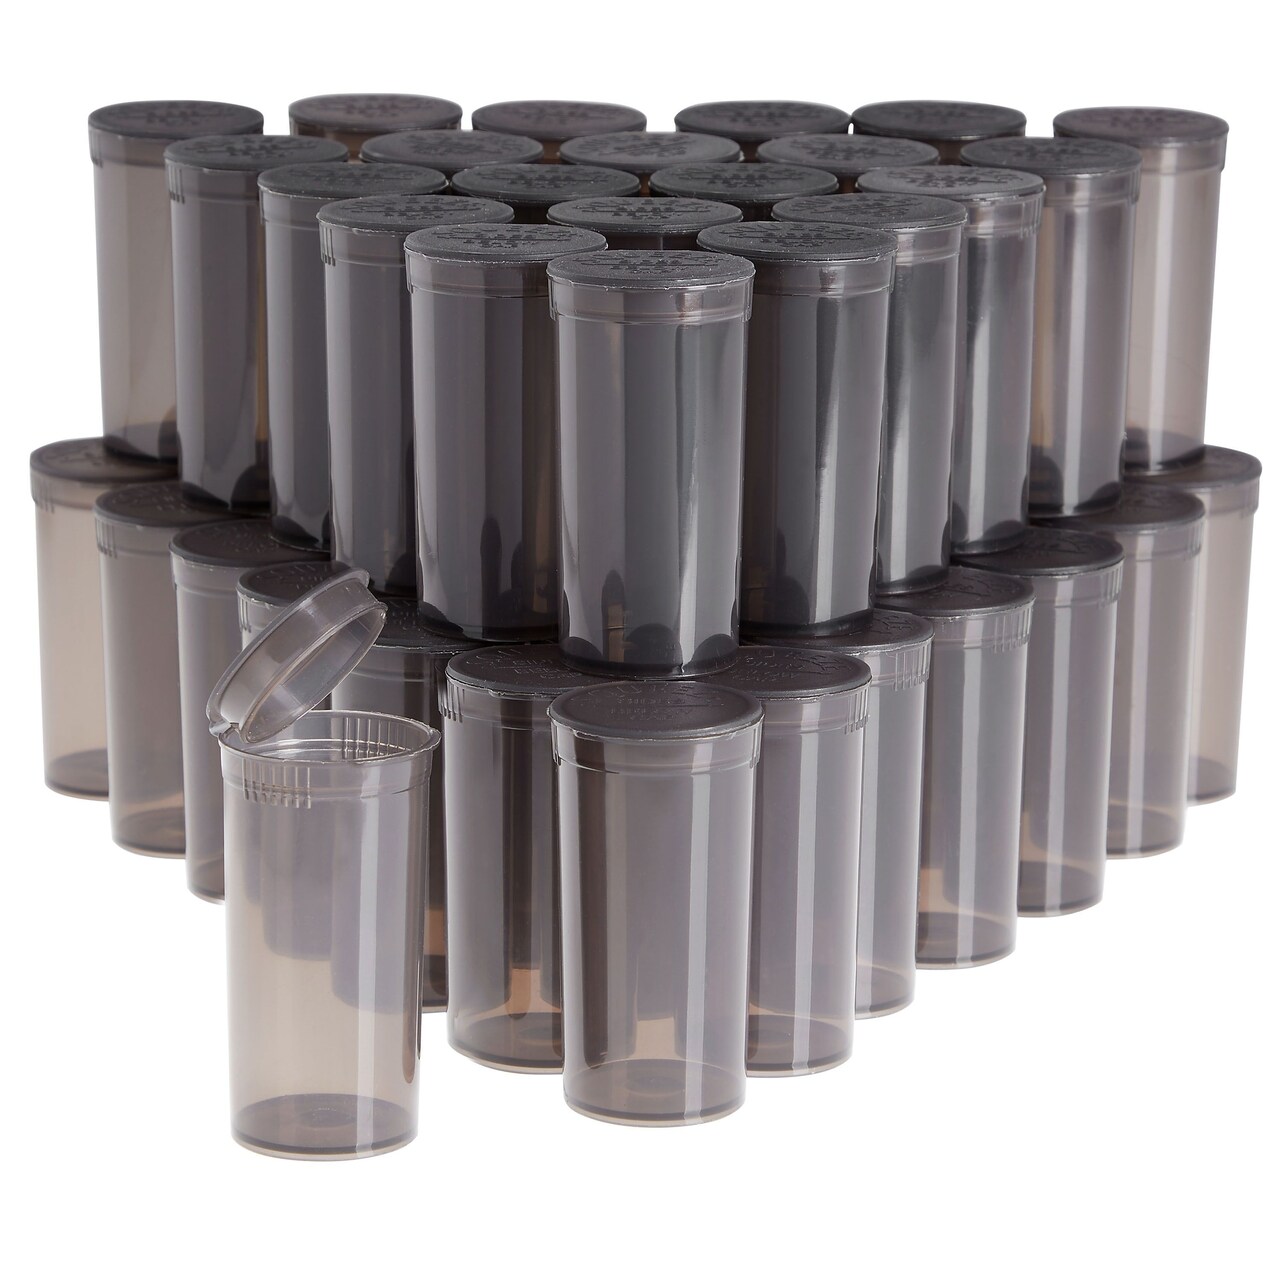 50 Pack Empty Pill Bottles with Caps - 13 Dram Medicine Containers